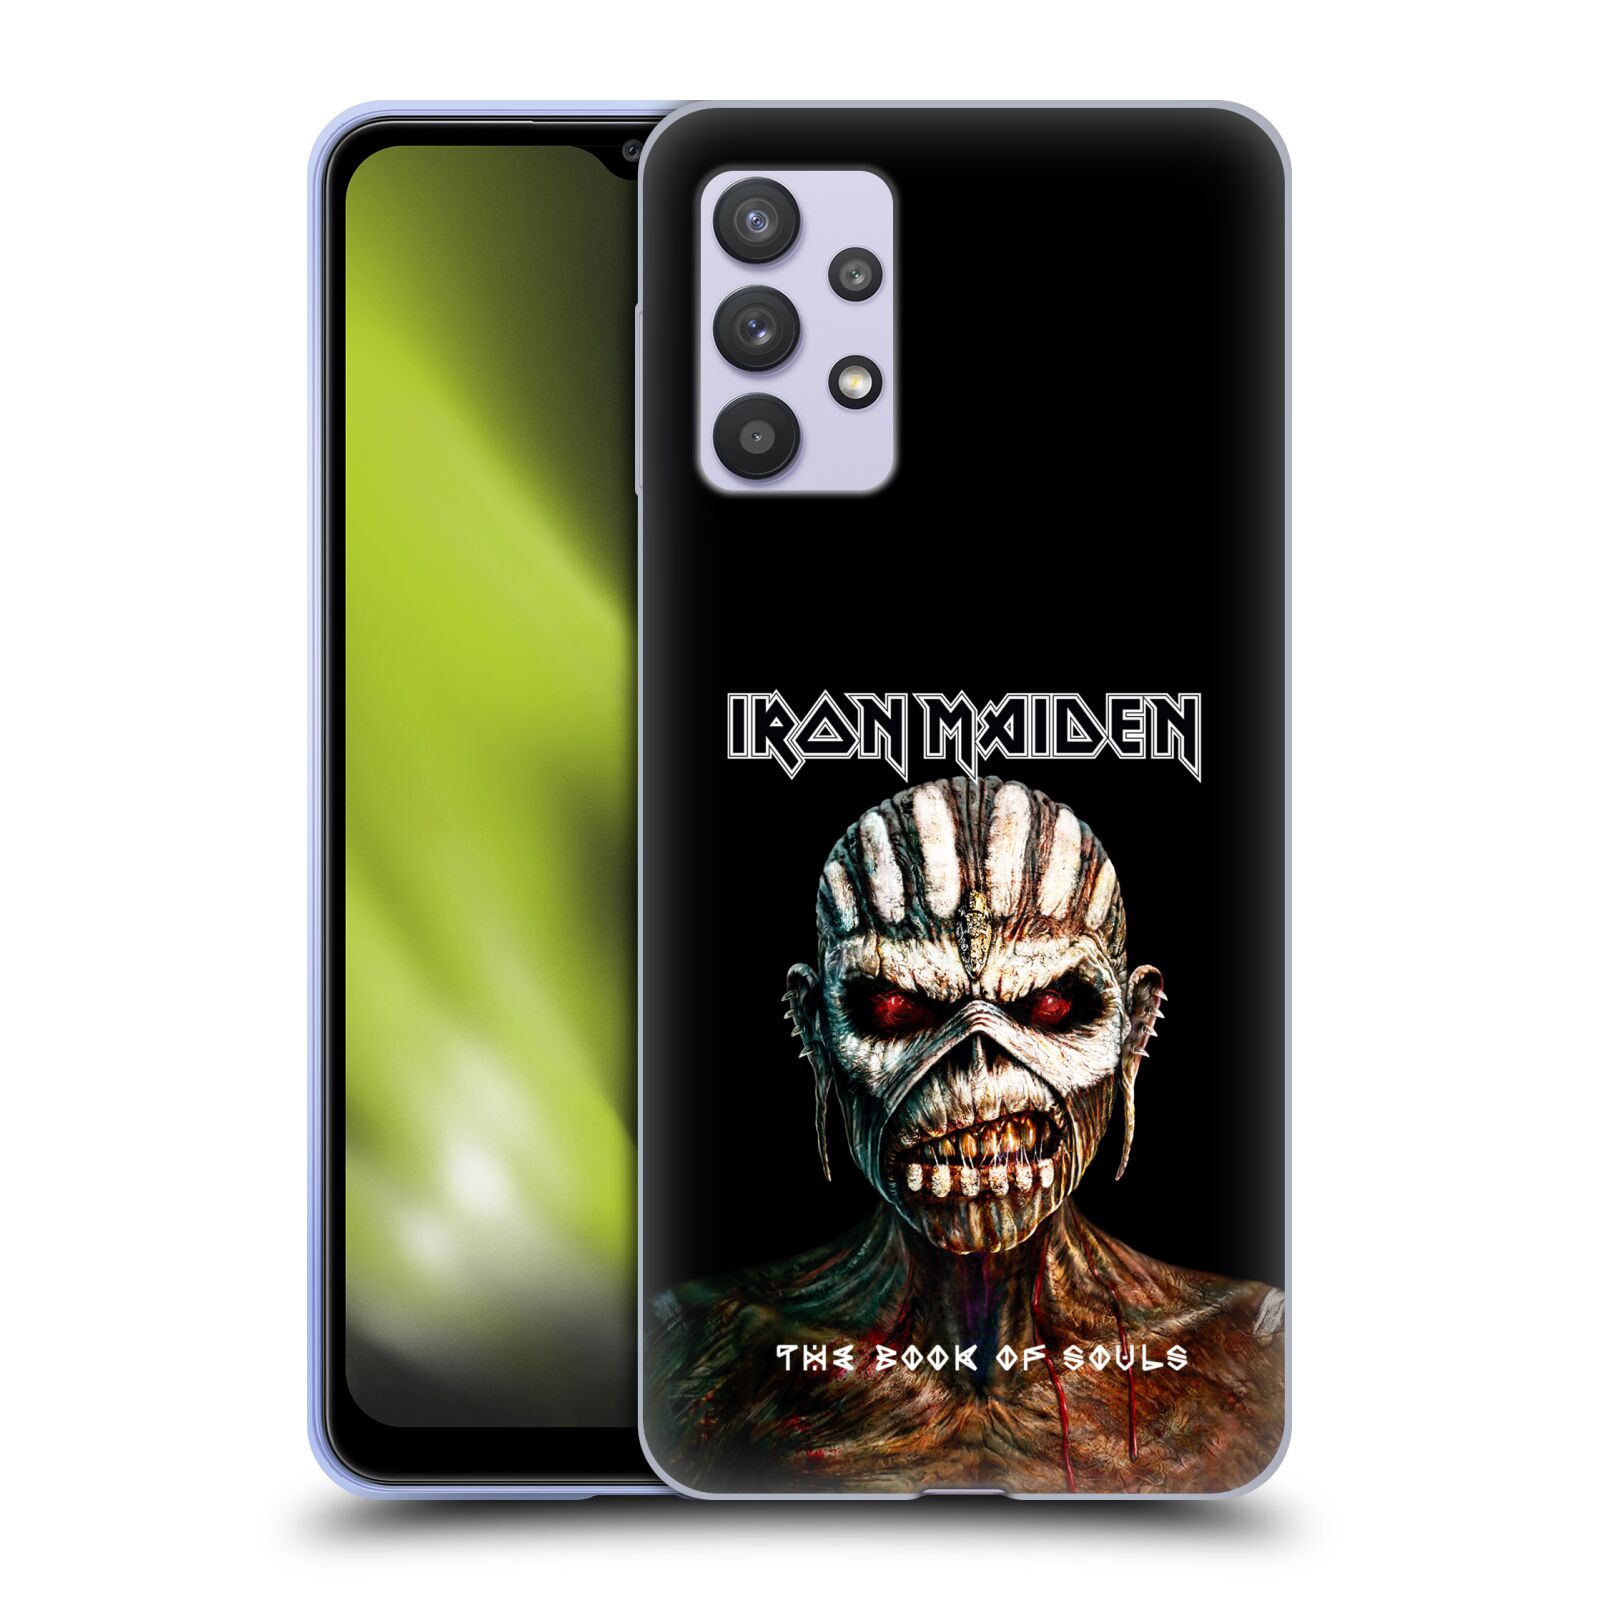 Silikonové pouzdro na mobil Samsung Galaxy A32 5G - Head Case - Iron Maiden - The Book Of Souls (Silikonový kryt, obal, pouzdro na mobilní telefon Samsung Galaxy A32 5G (SM-A326B) s motivem Iron Maiden - The Book Of Souls)